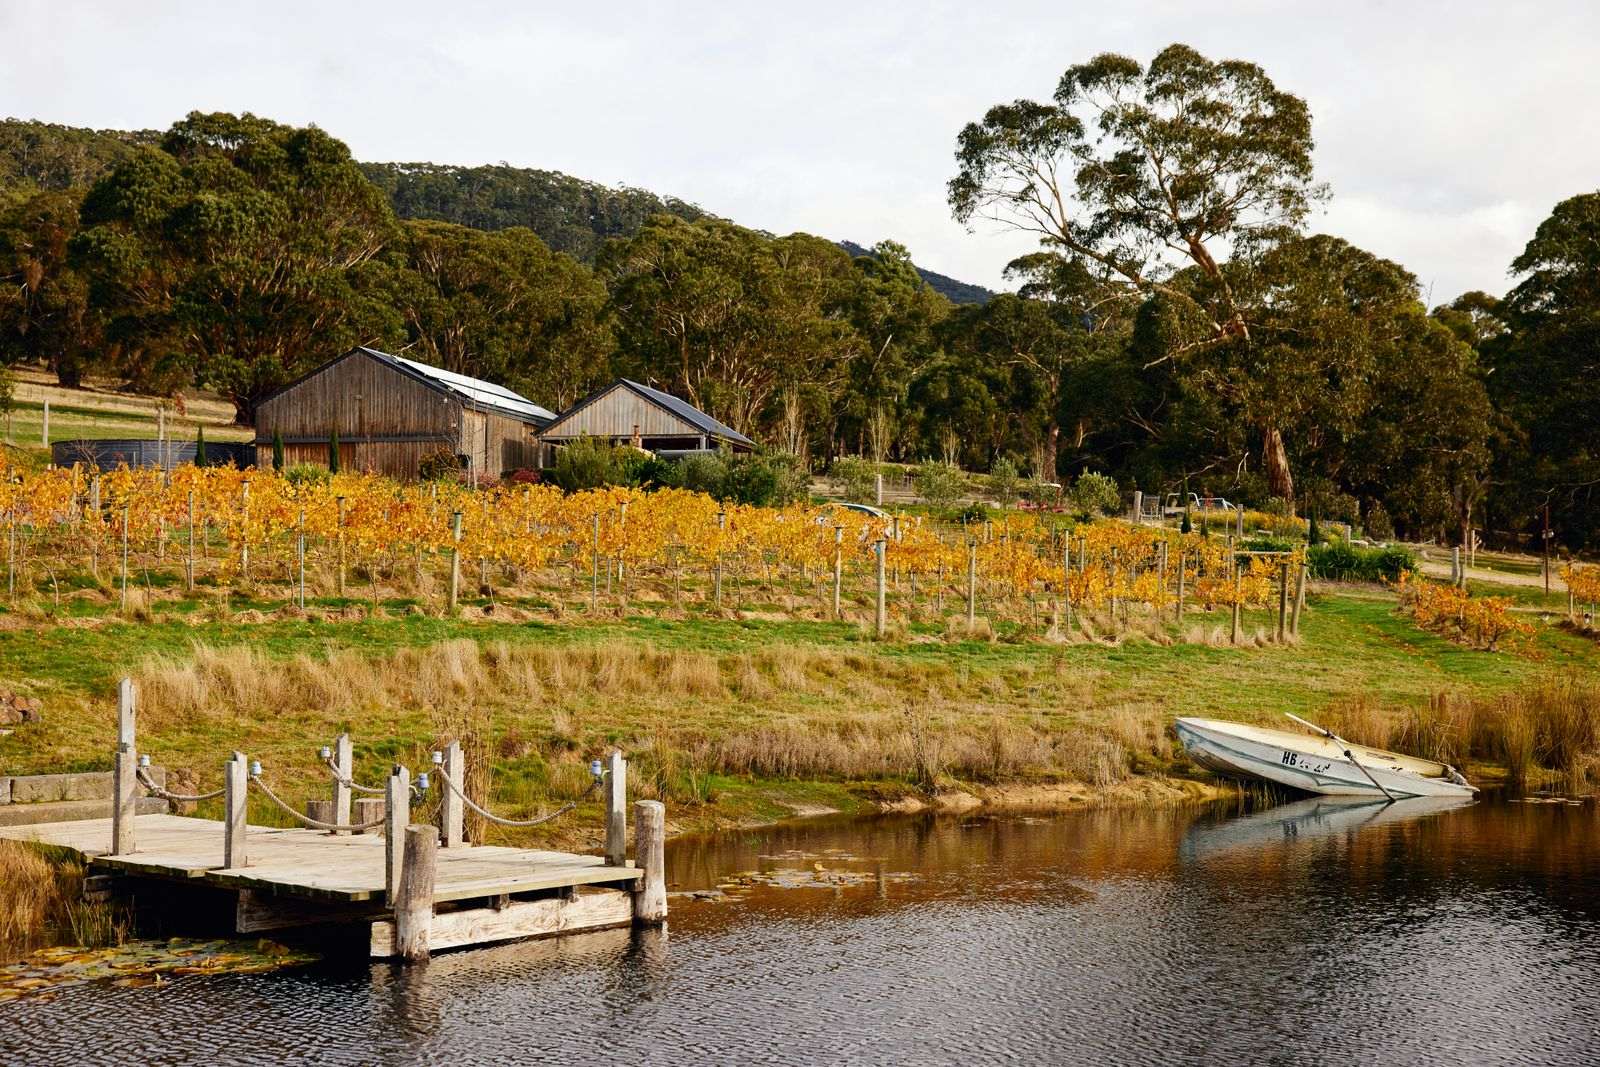 A pulled back exterior shot showing The Glut Farm surrounded by vineyards and with a dam in the foreground